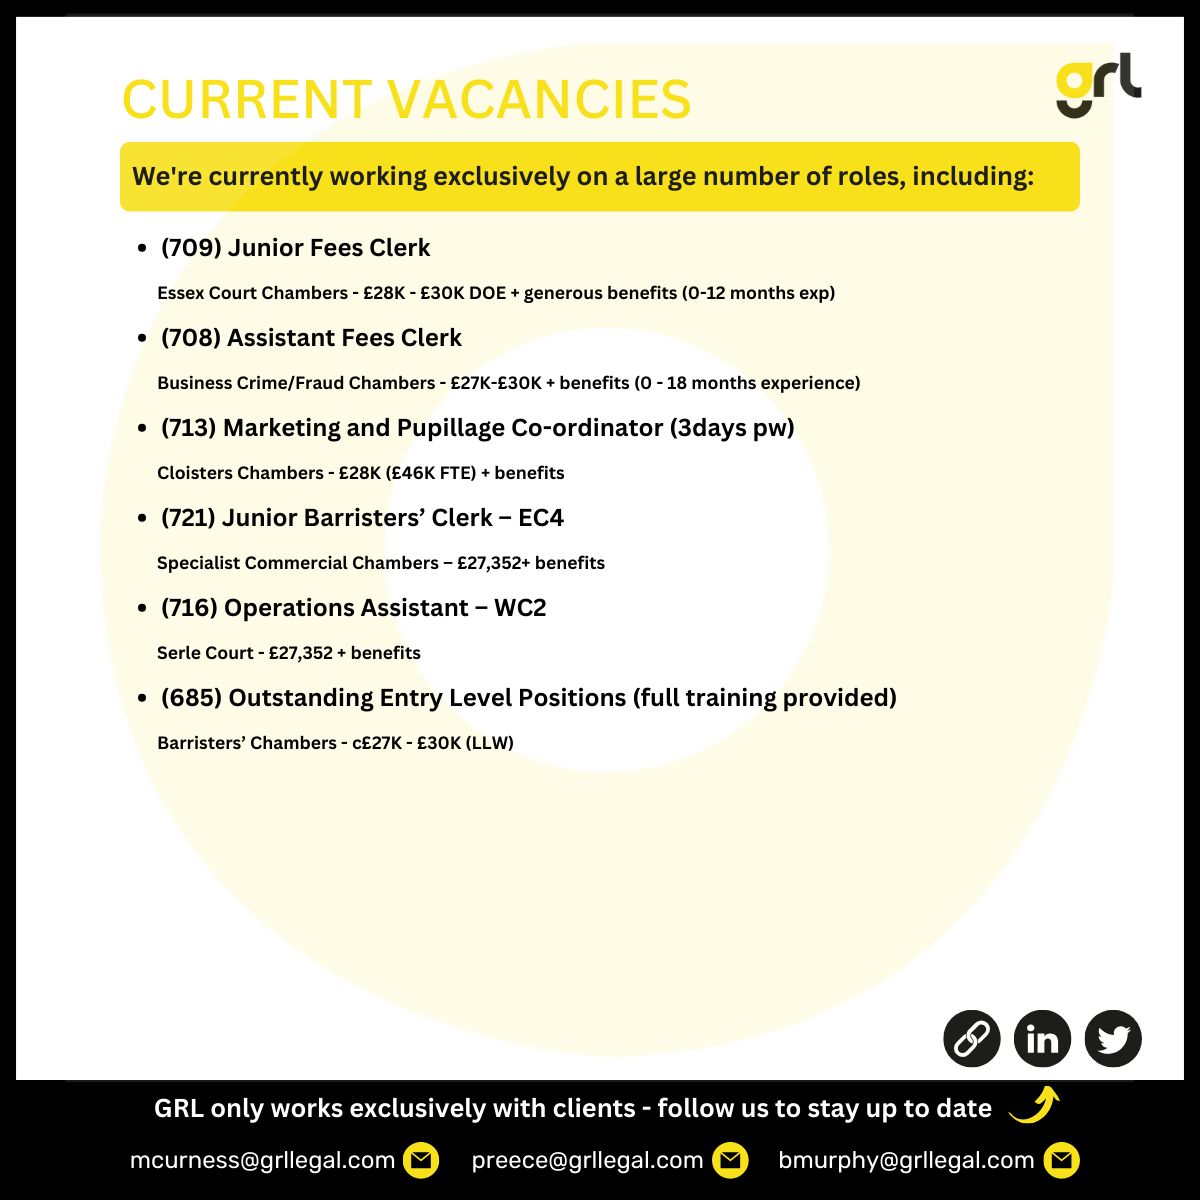 GRL bring you exciting opportunities for #legalcareer advancement across the UK. We have a number of legal recruitment #vacancies at Leading Organisations. Our current vacancies are here. Full advertisements on our website. 

Send your CV ⬇️ 
📧 recruitment@grllegal.com